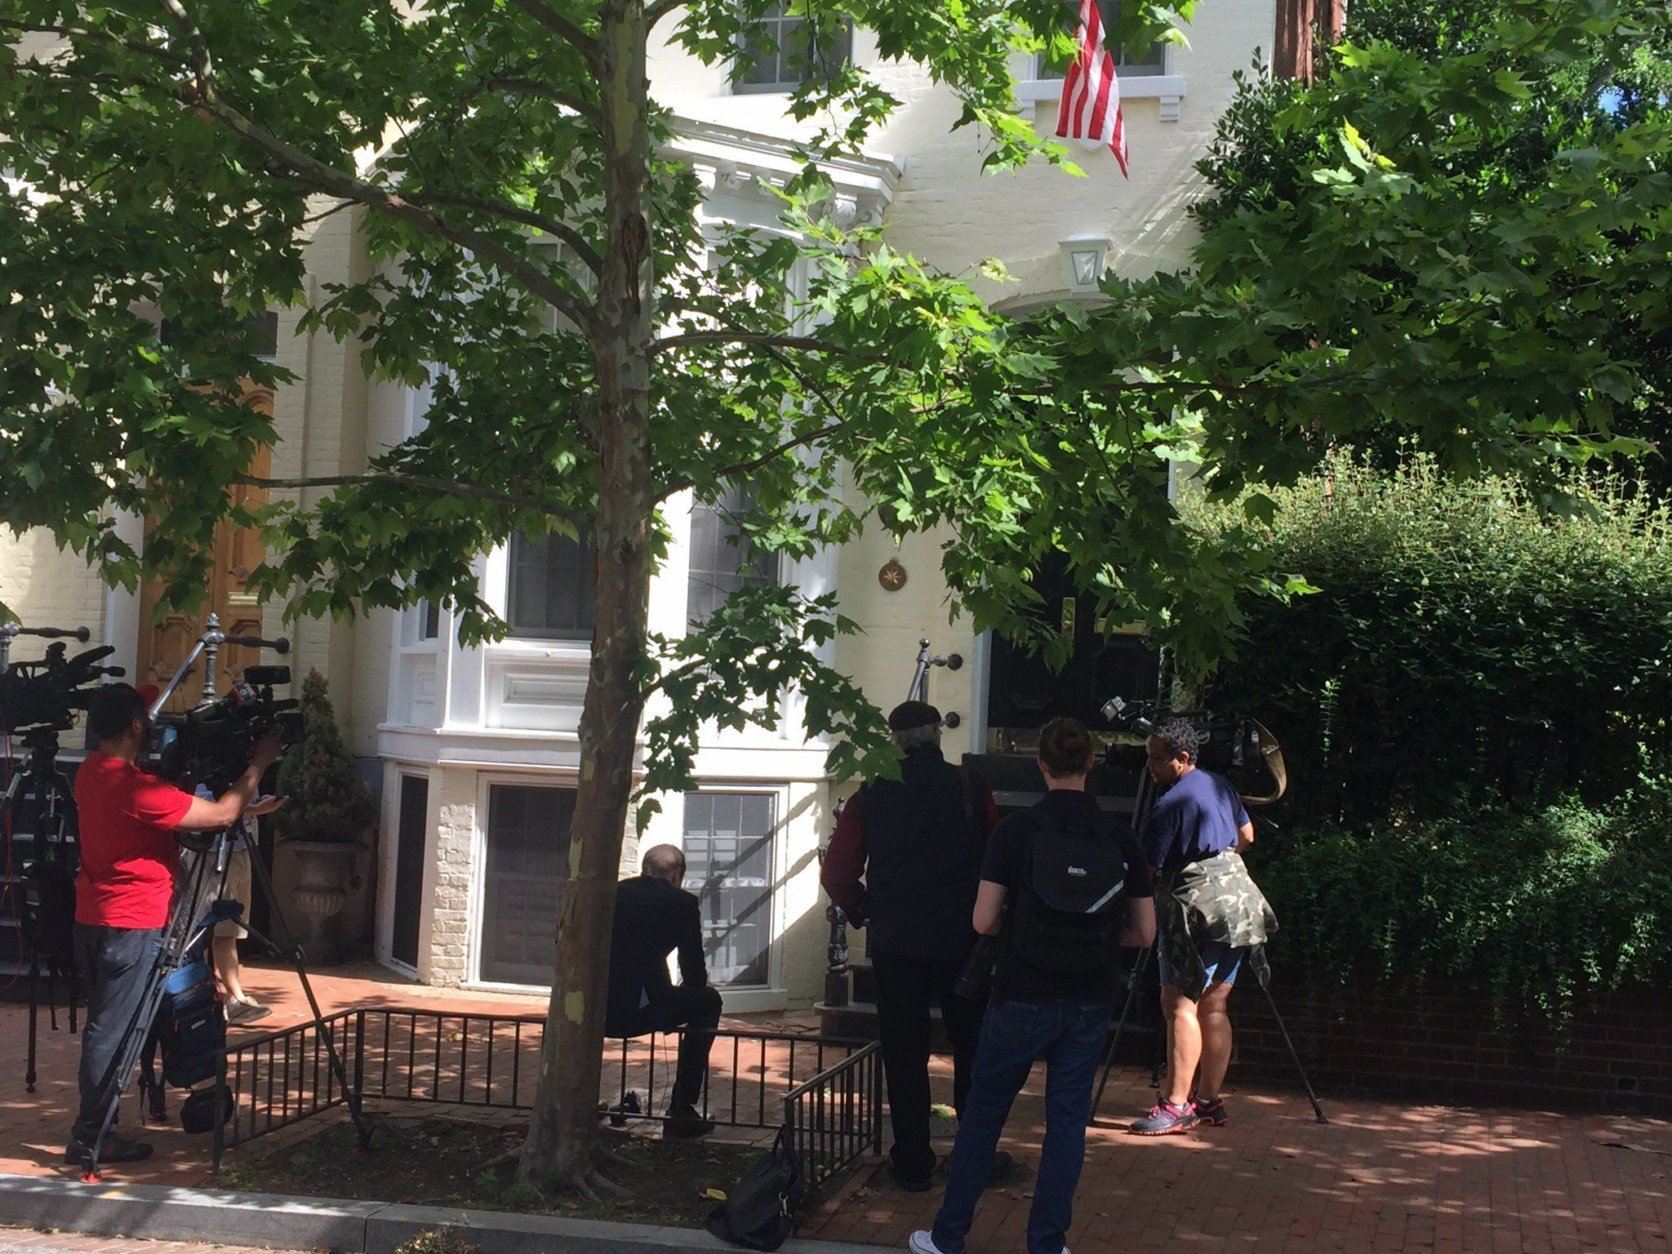 Media outside Jack Evans' home in Georgetown on Friday after an FBI search. (WTOP/John Domen)